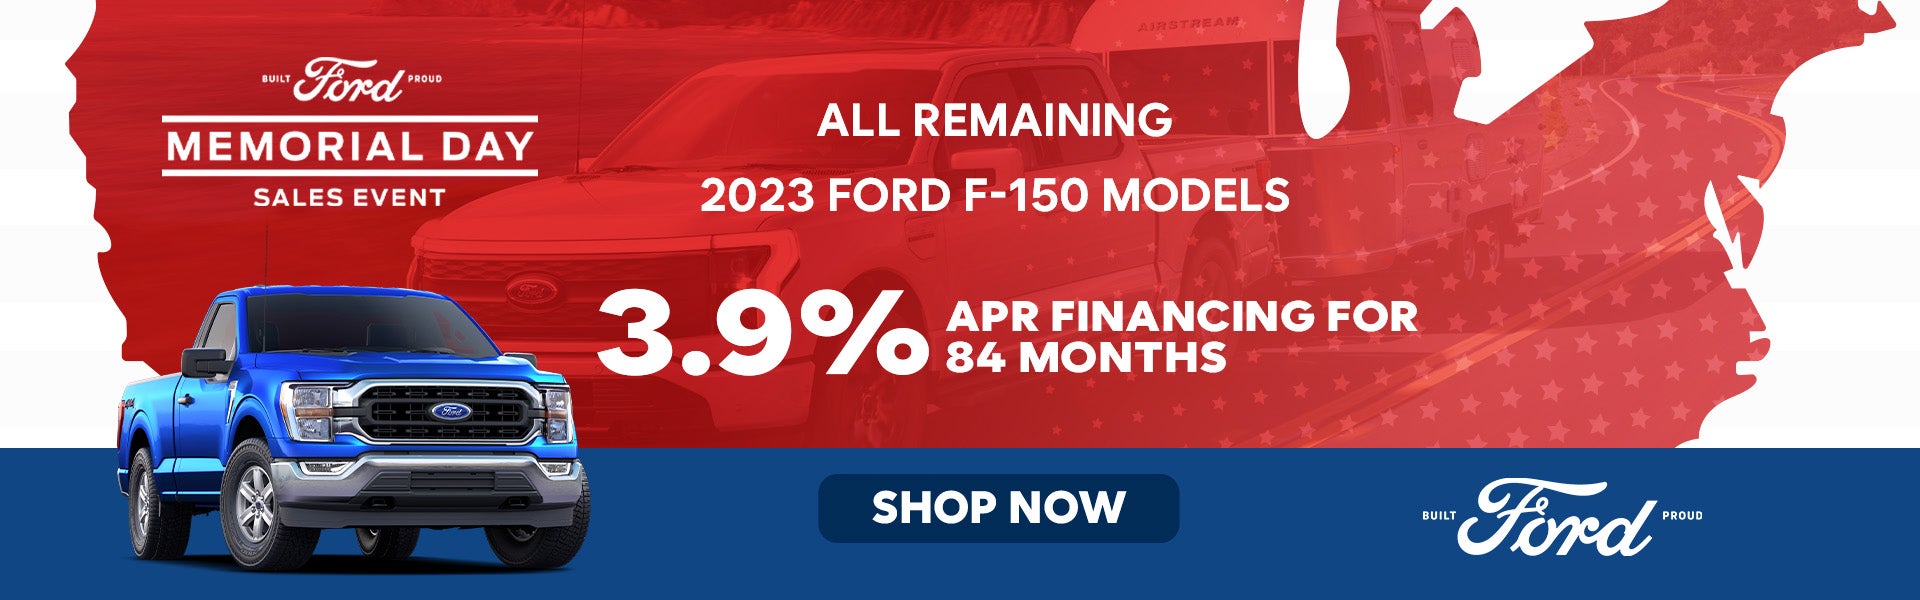 Save on New 2023 Ford F-150 Models